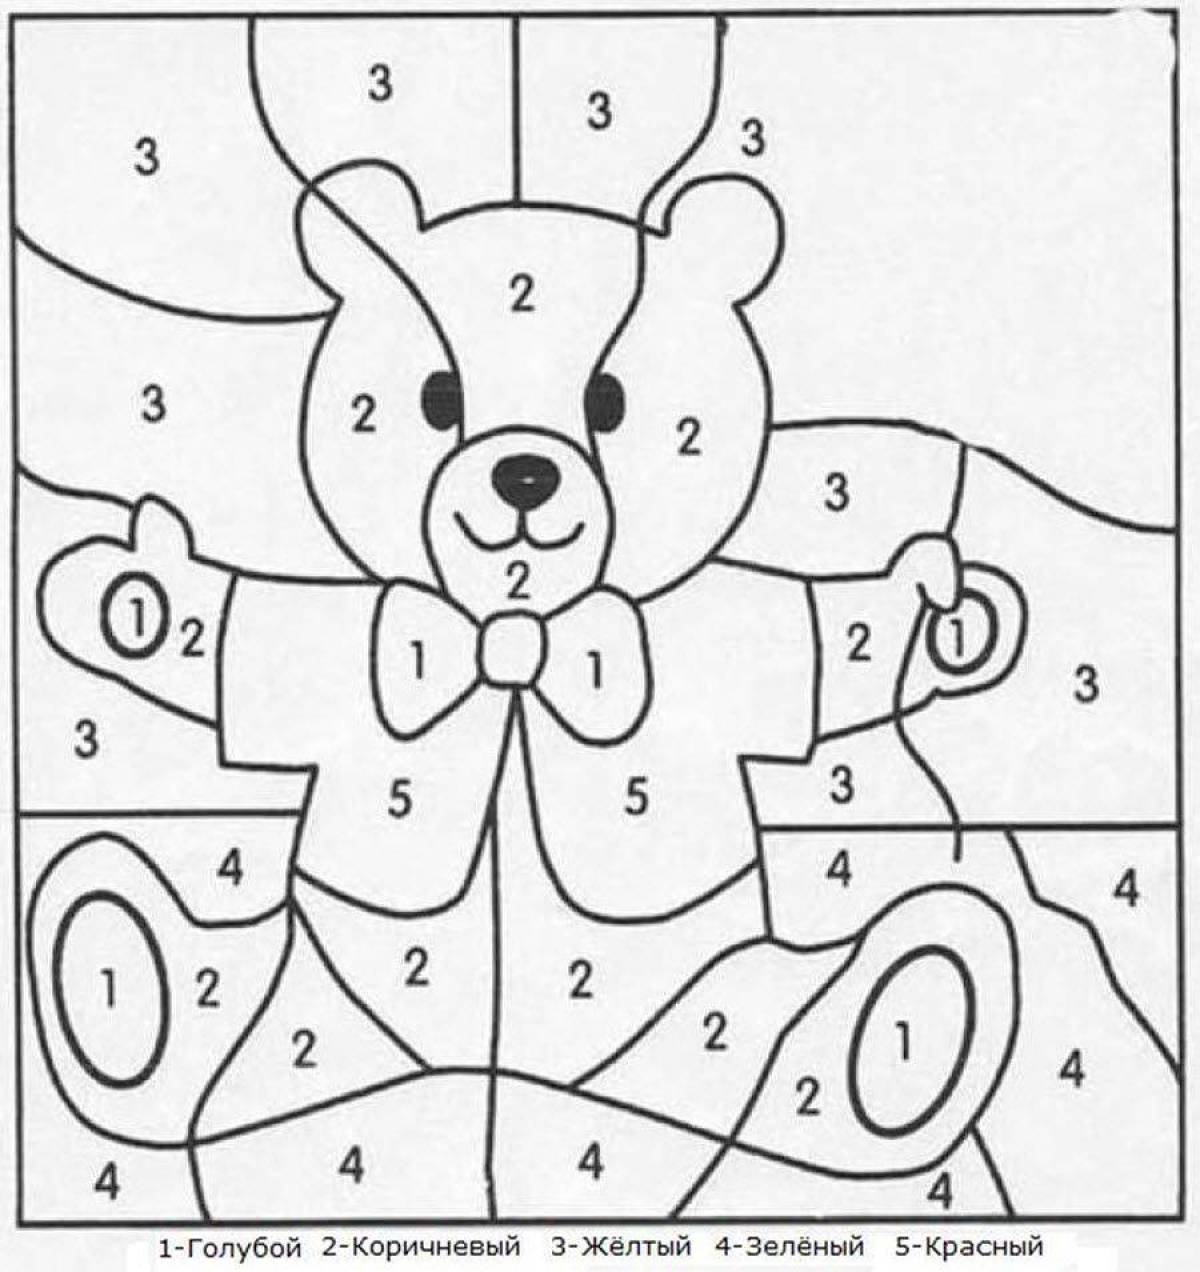 By numbers for kids #8